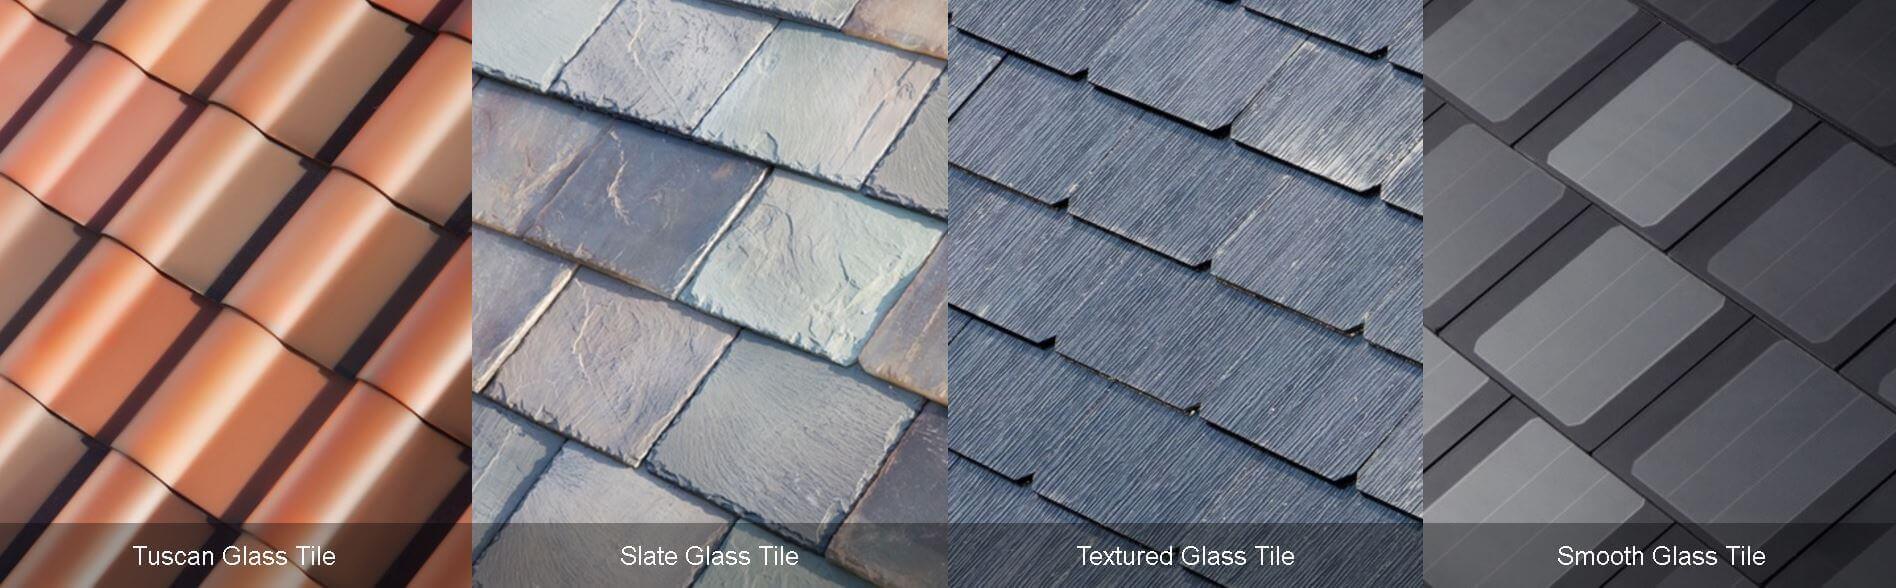 The styles of Tesla glass solar roof you can choose from